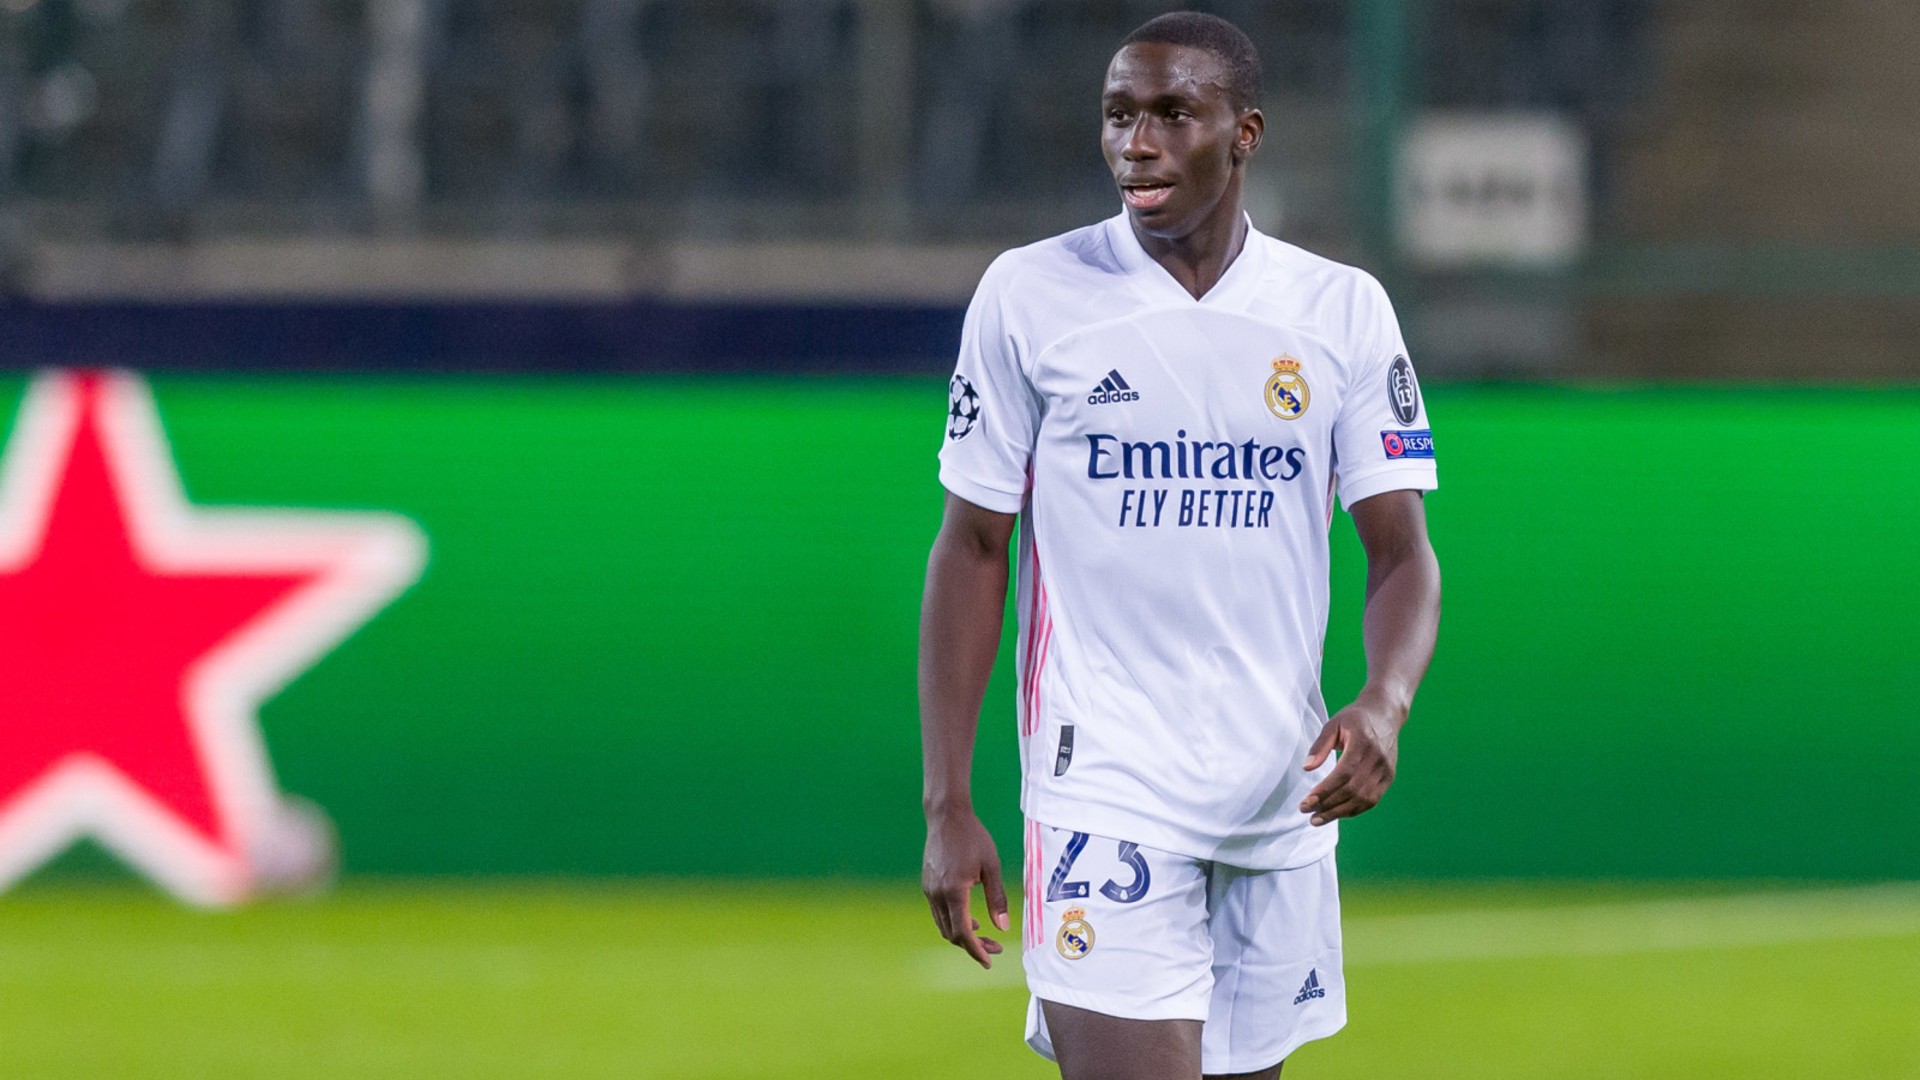 Ferland Mendy could miss rest of the season for Real Madrid - reports